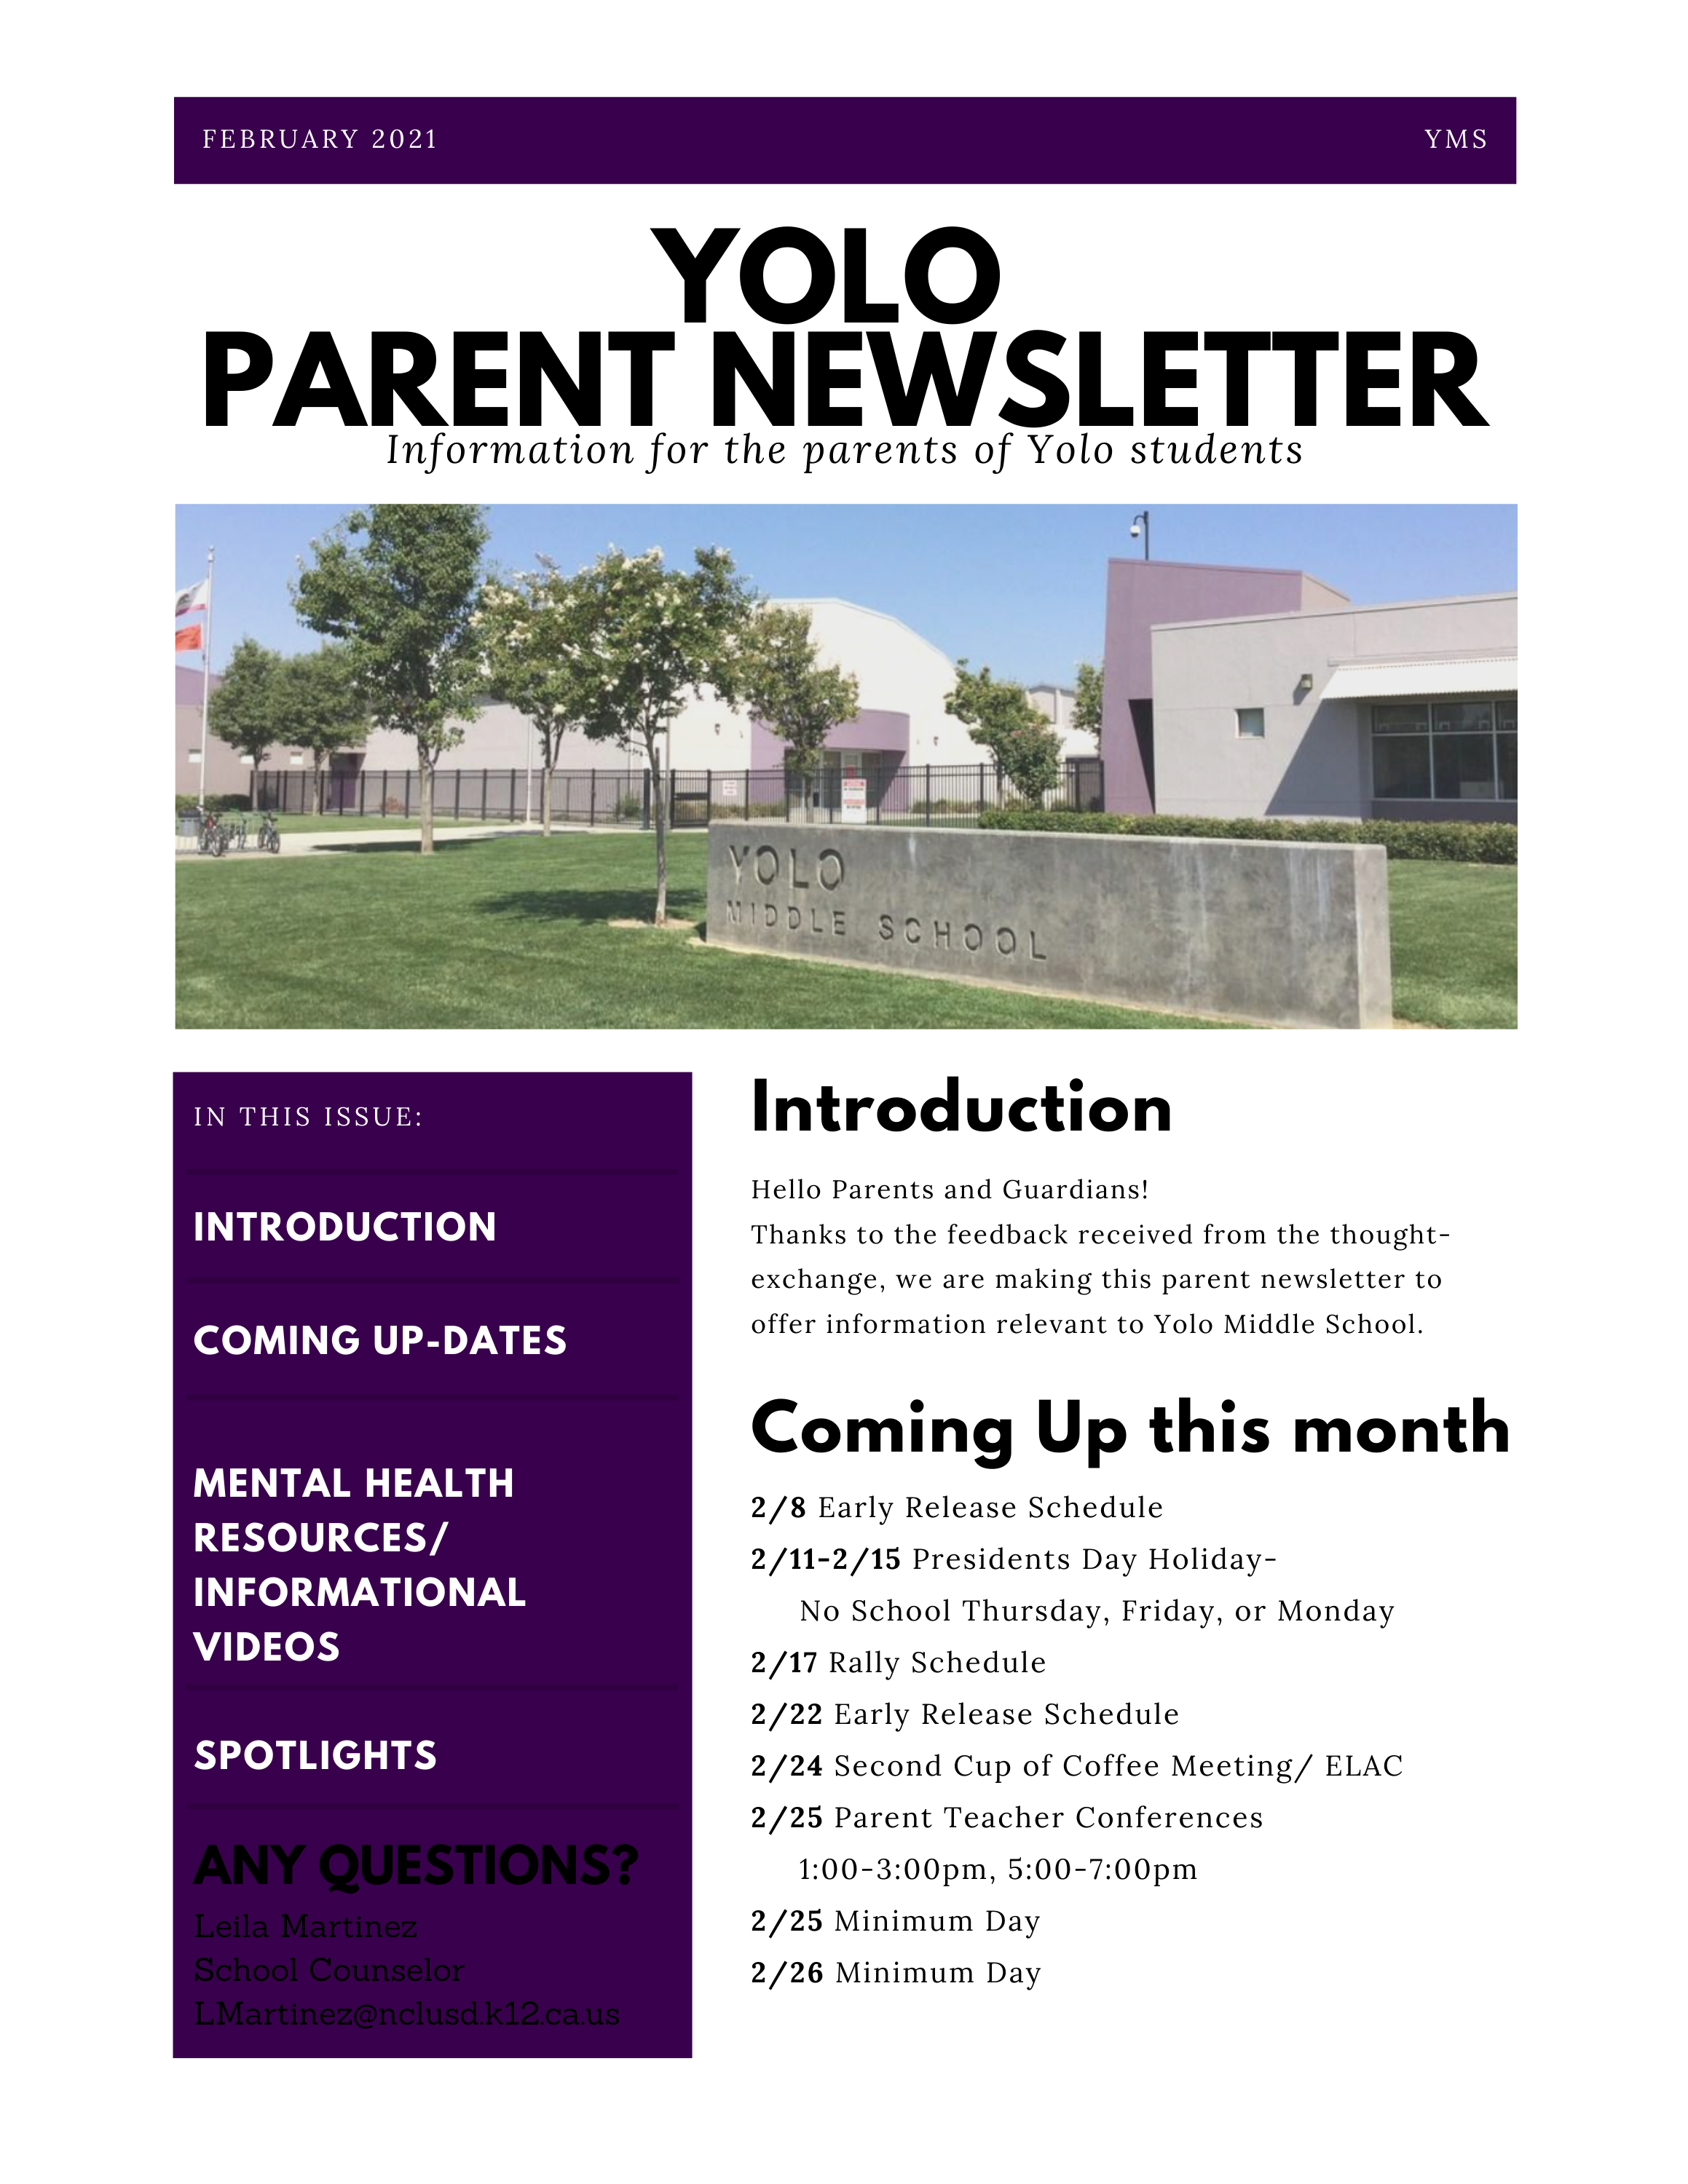 February 2021 Newsletter-Link to PDF